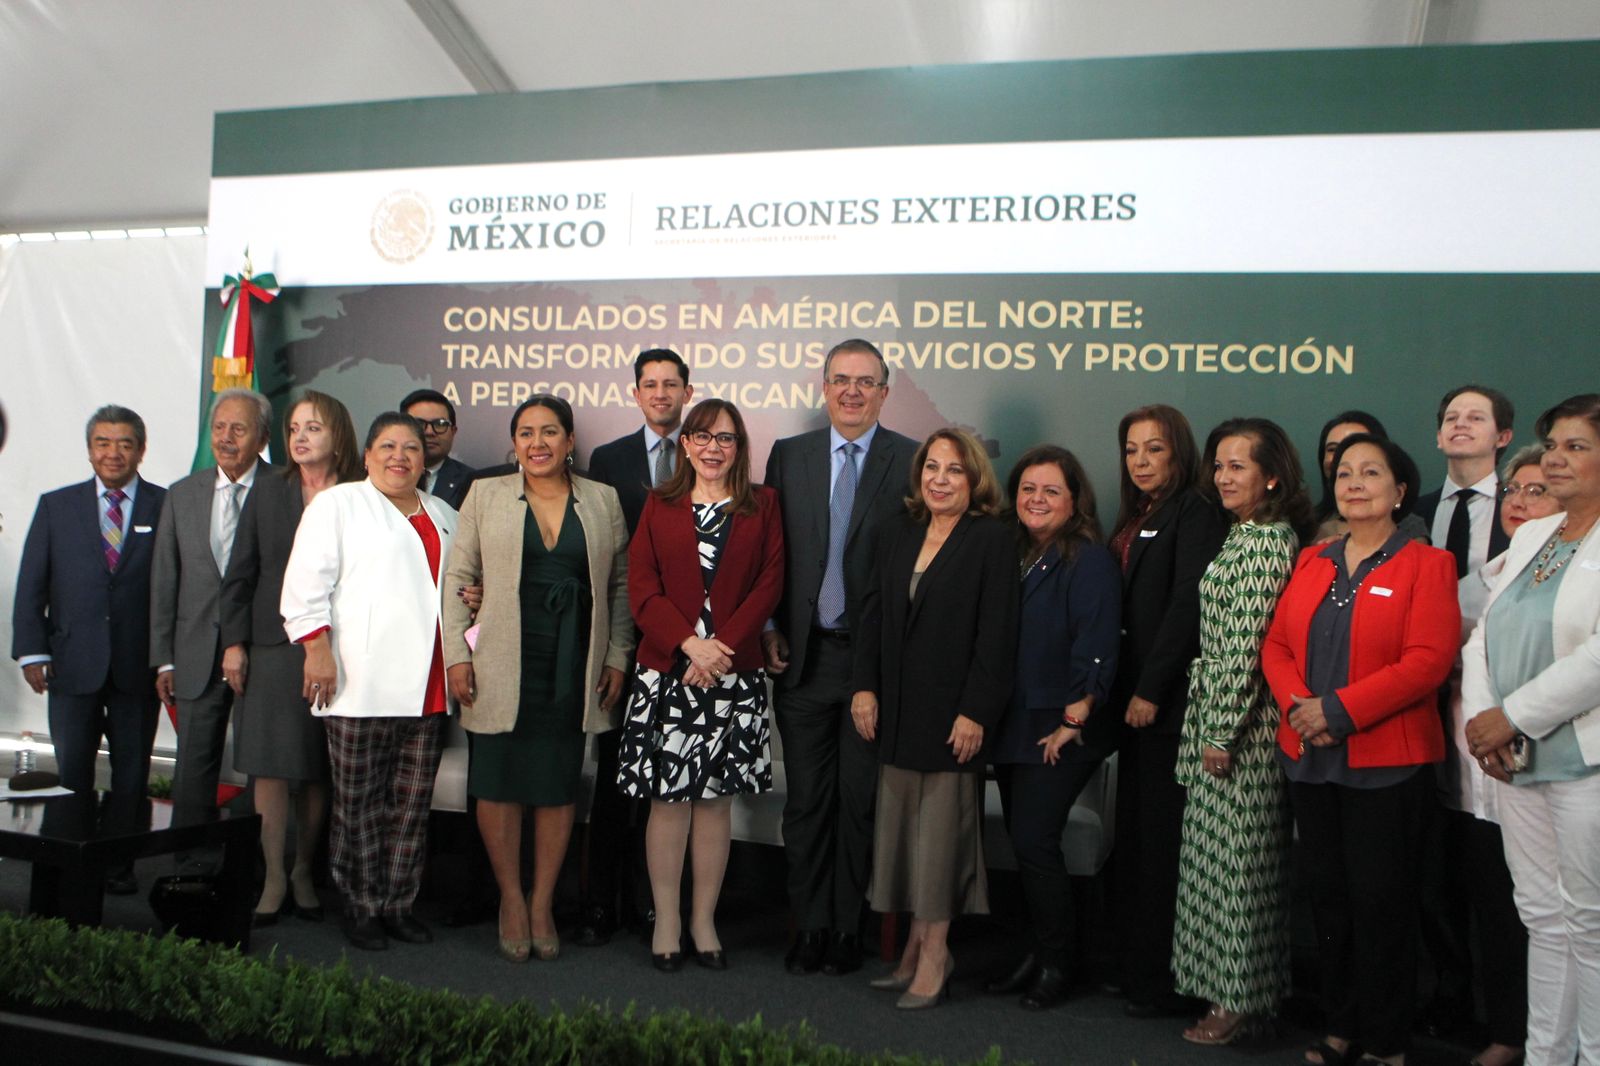 Foreign Secretary Ebrard announces transformations to Mexicos consular services to increase protection for Mexicans abroad